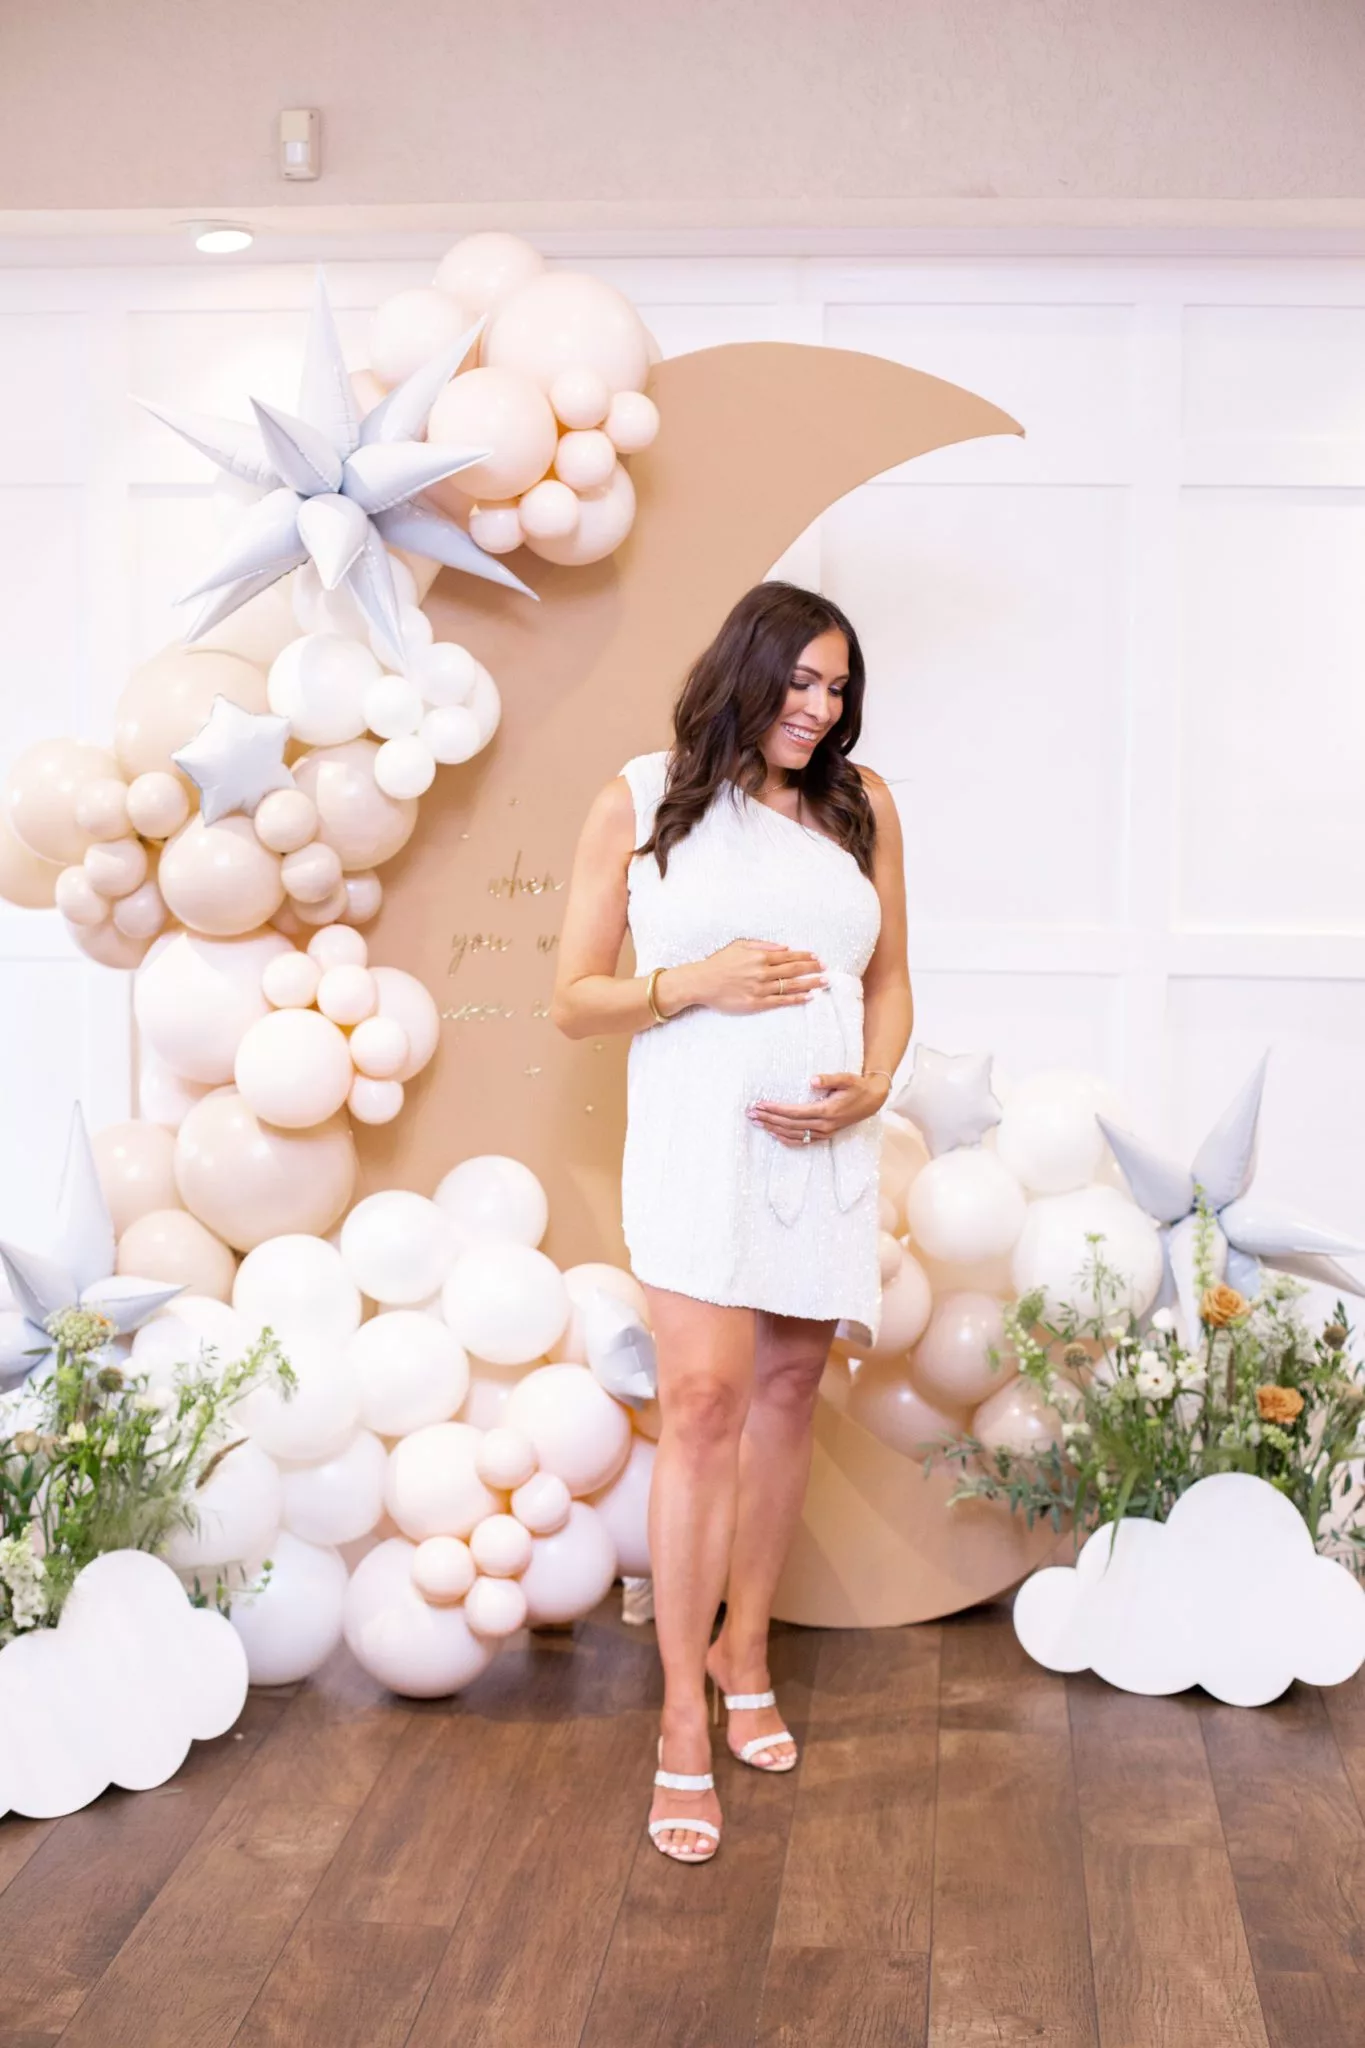 What are Good Ideas for Baby Shower? 10 Best 